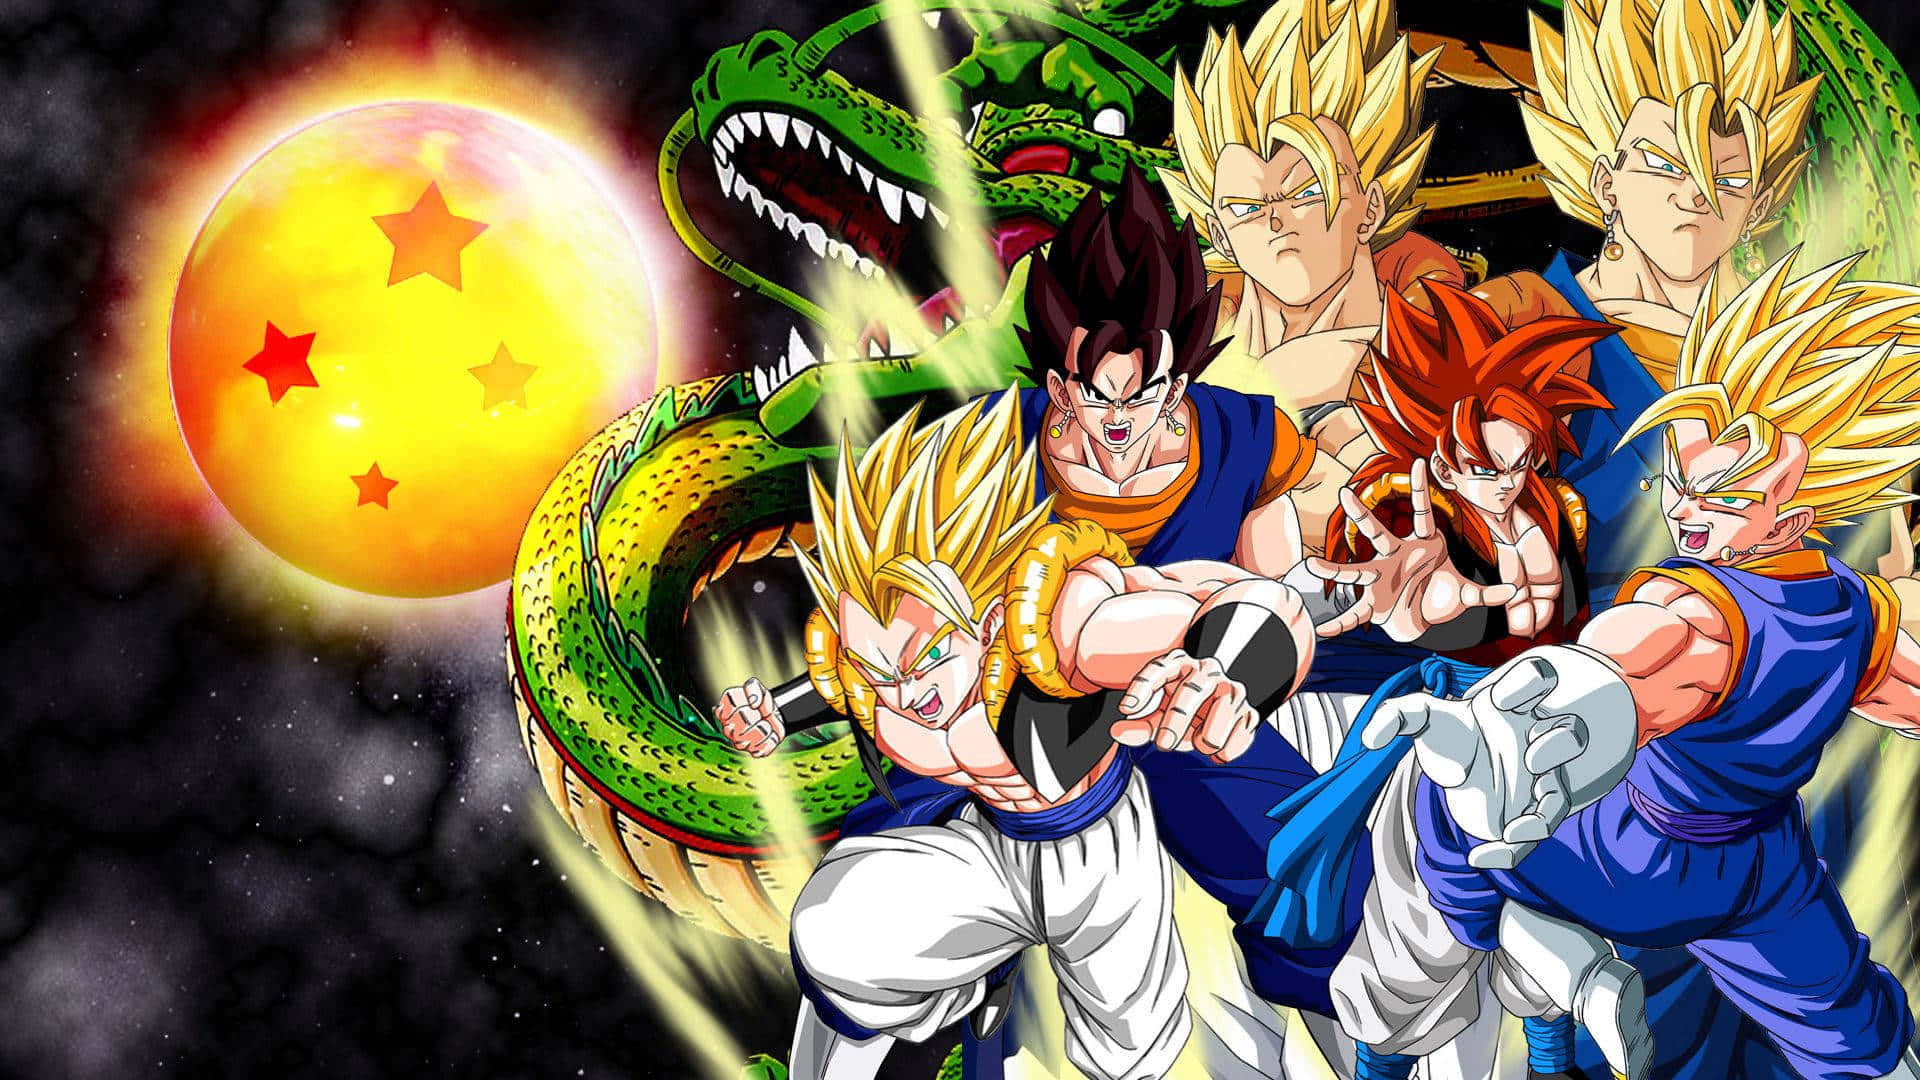 Dragon Ball Z Characters in Action Wallpaper